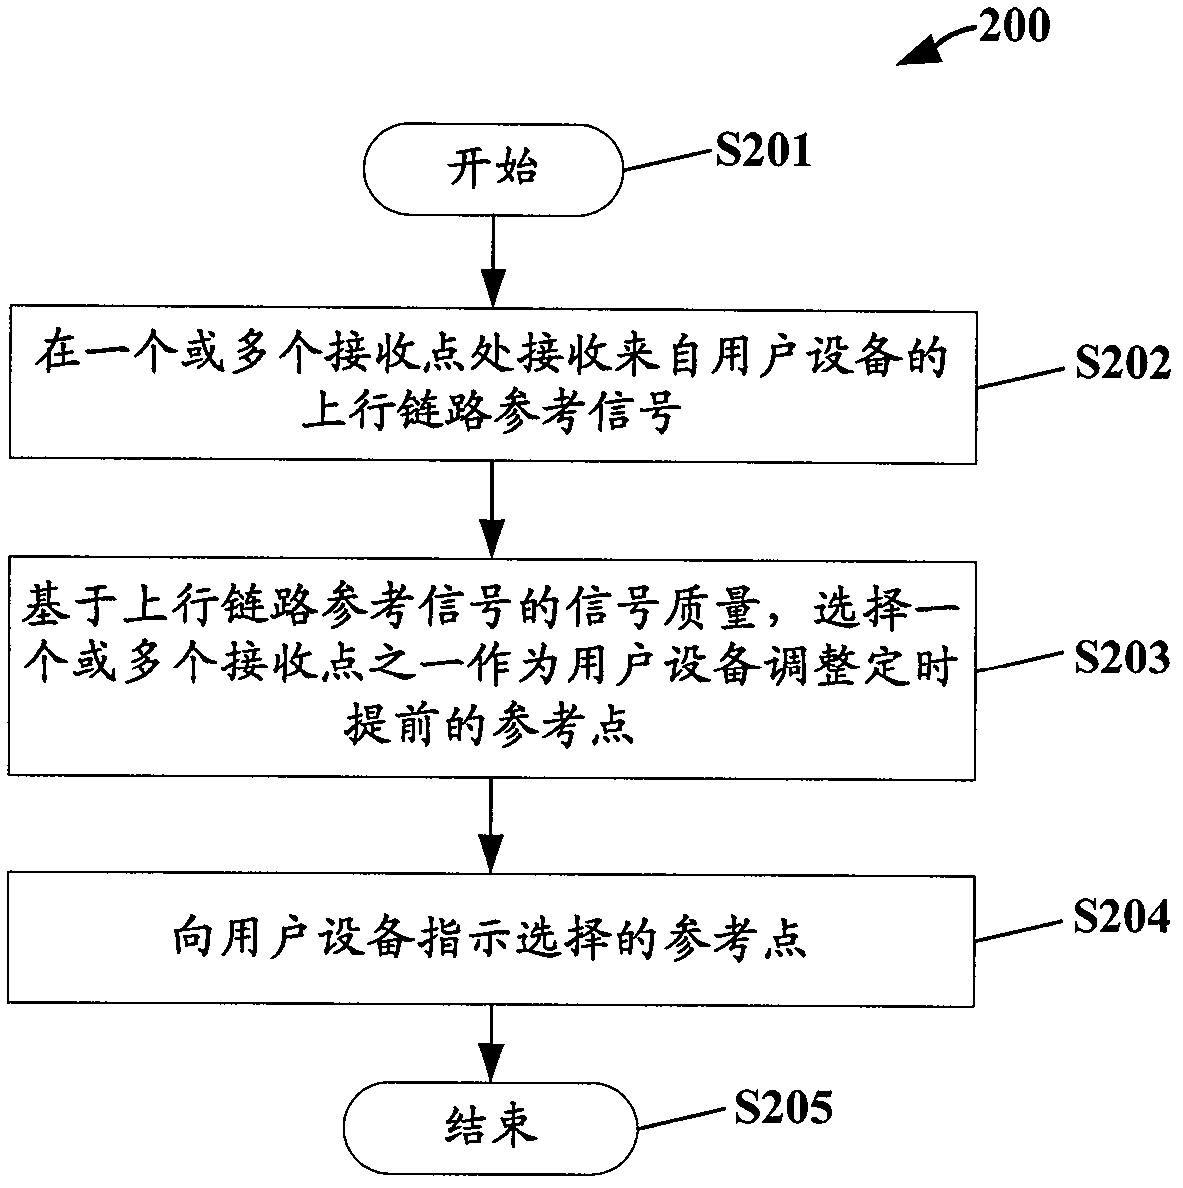 Method and device for adjusting timing advance in coordinated multi-point transmission